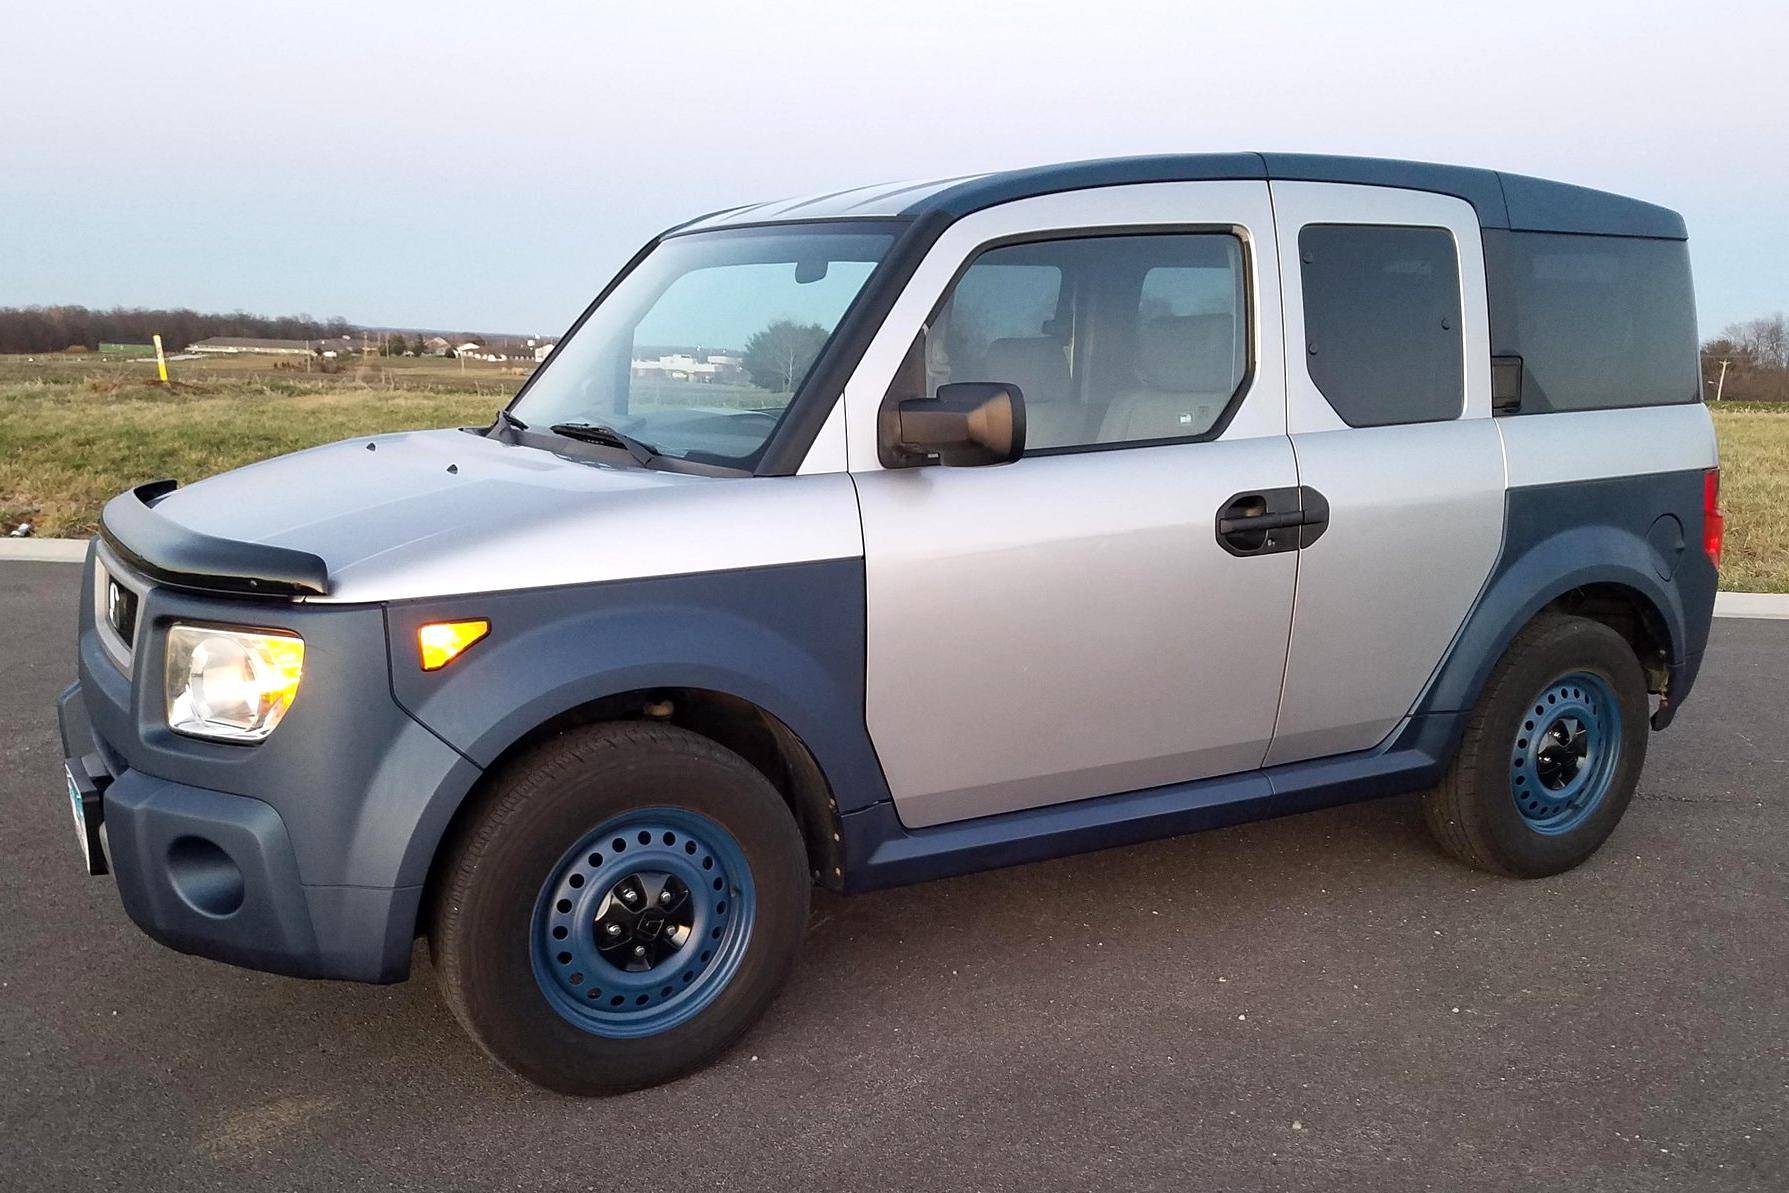 COAL: 2006 Honda Element - Quirky and Fun Box on Wheels - Curbside